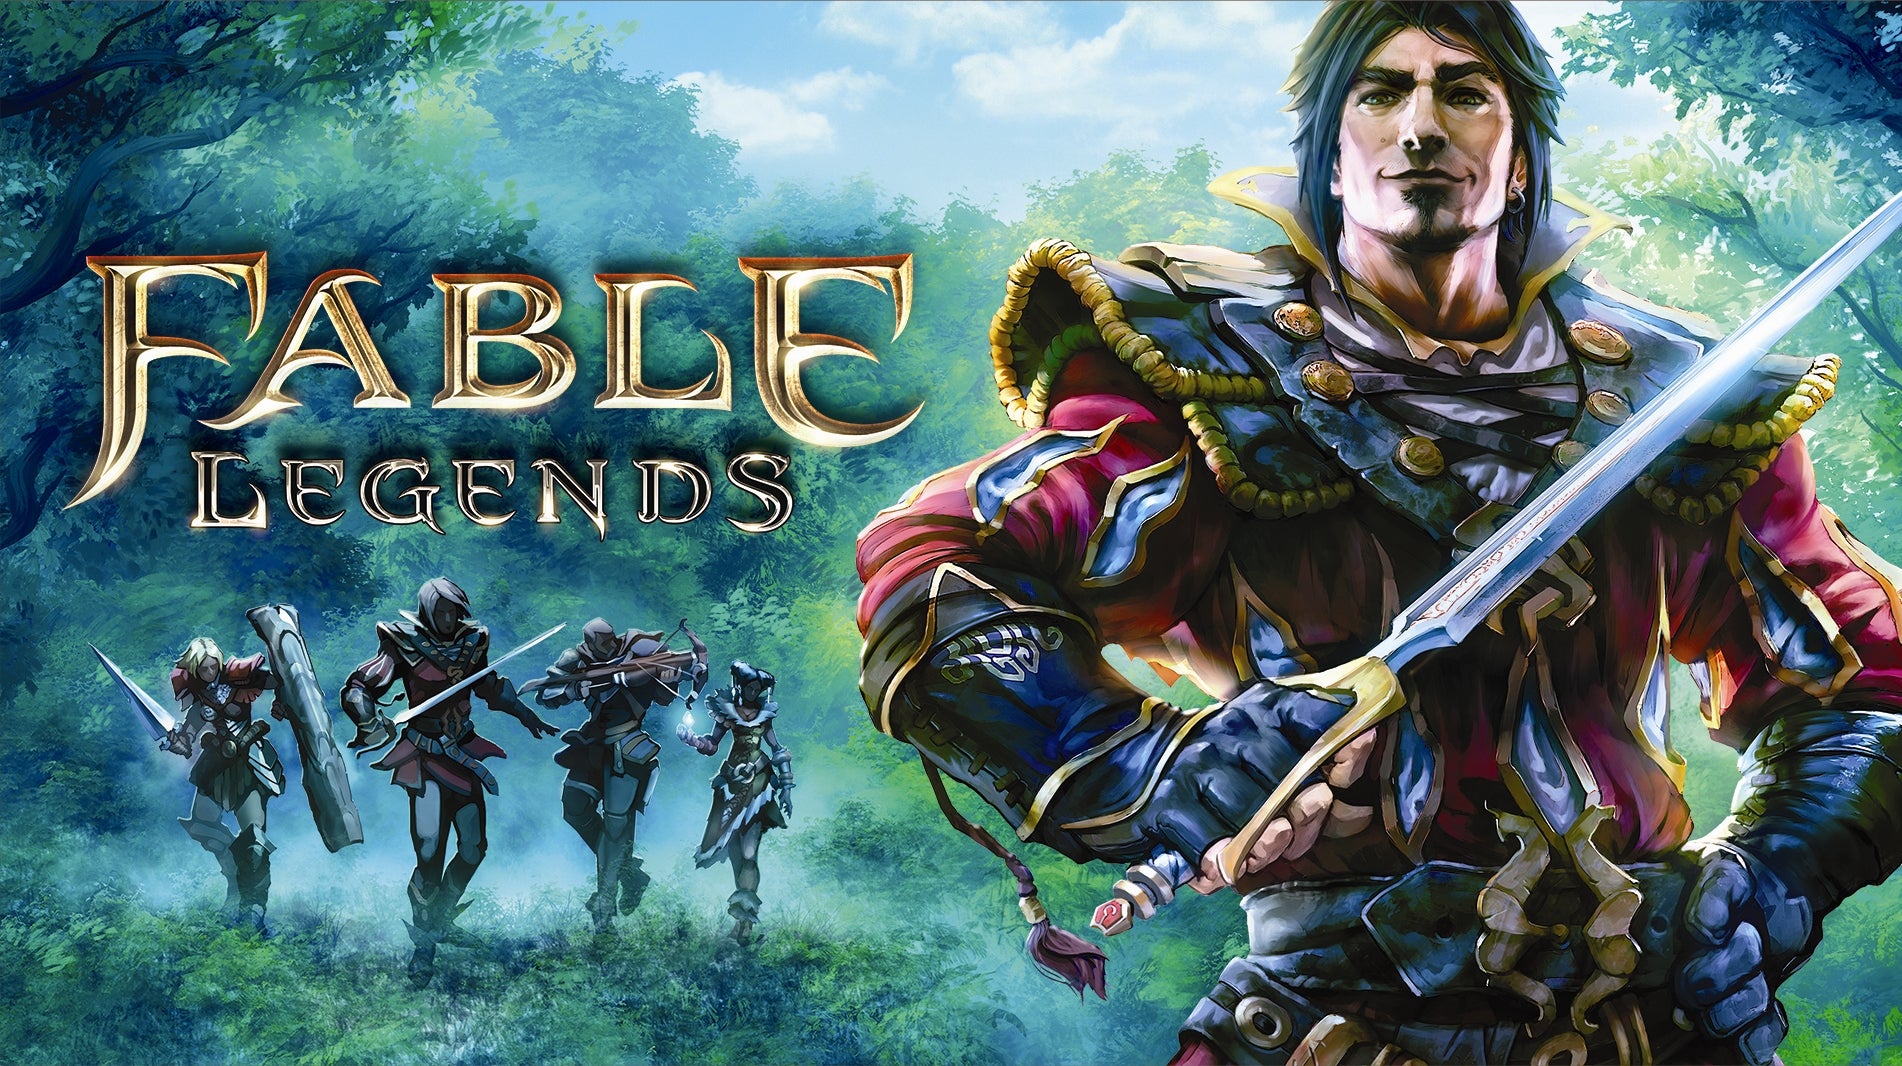 Imagen para Fable Legends será free-to-play